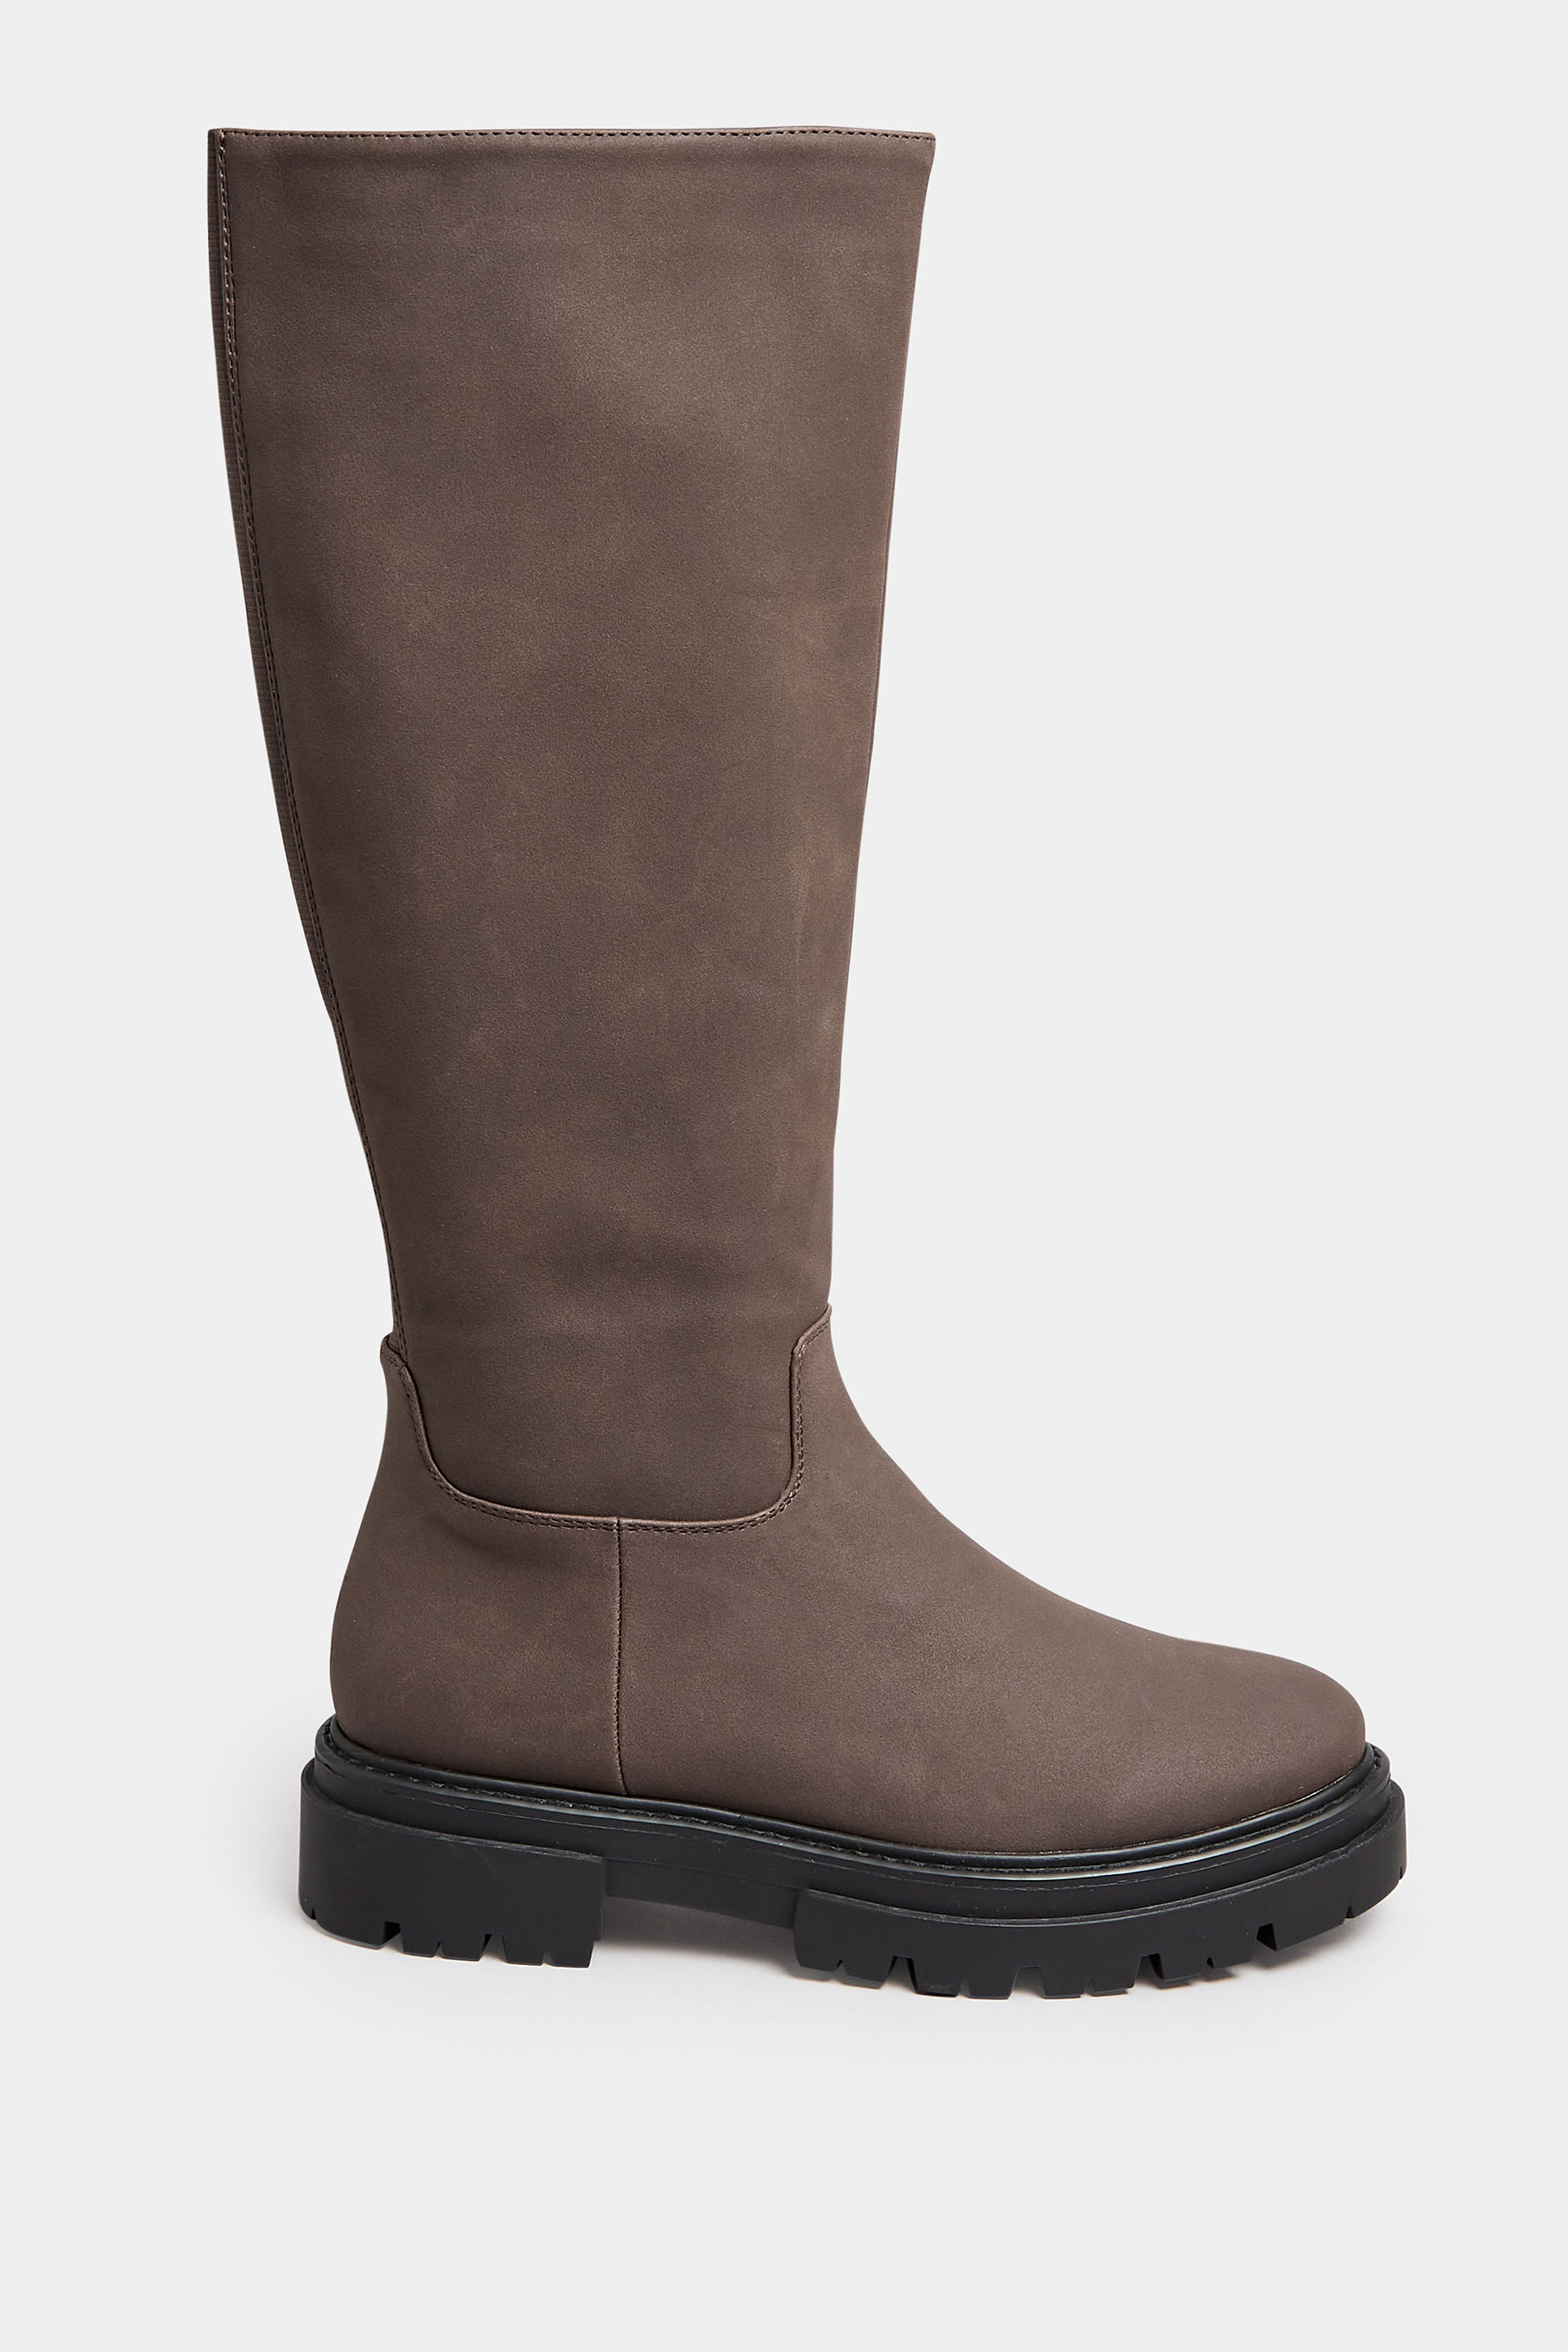 Brown Chunky Calf Boots In Wide E Fit & Wide EEE Fit | Yours Clothing 3